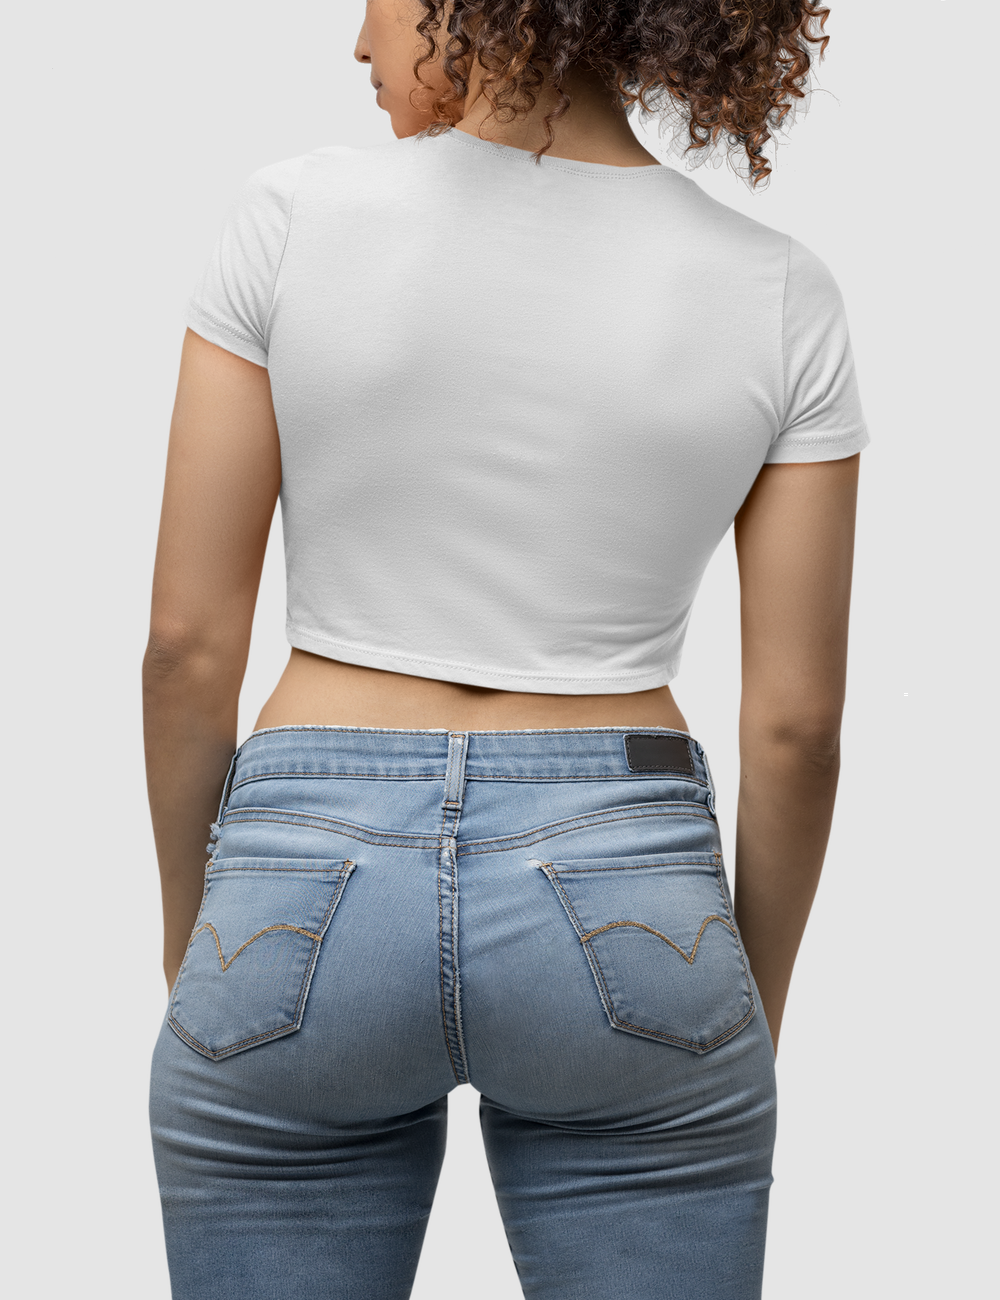 Touch My Butt And Buy Me Pizza | Women's Fitted Crop Top T-Shirt OniTakai